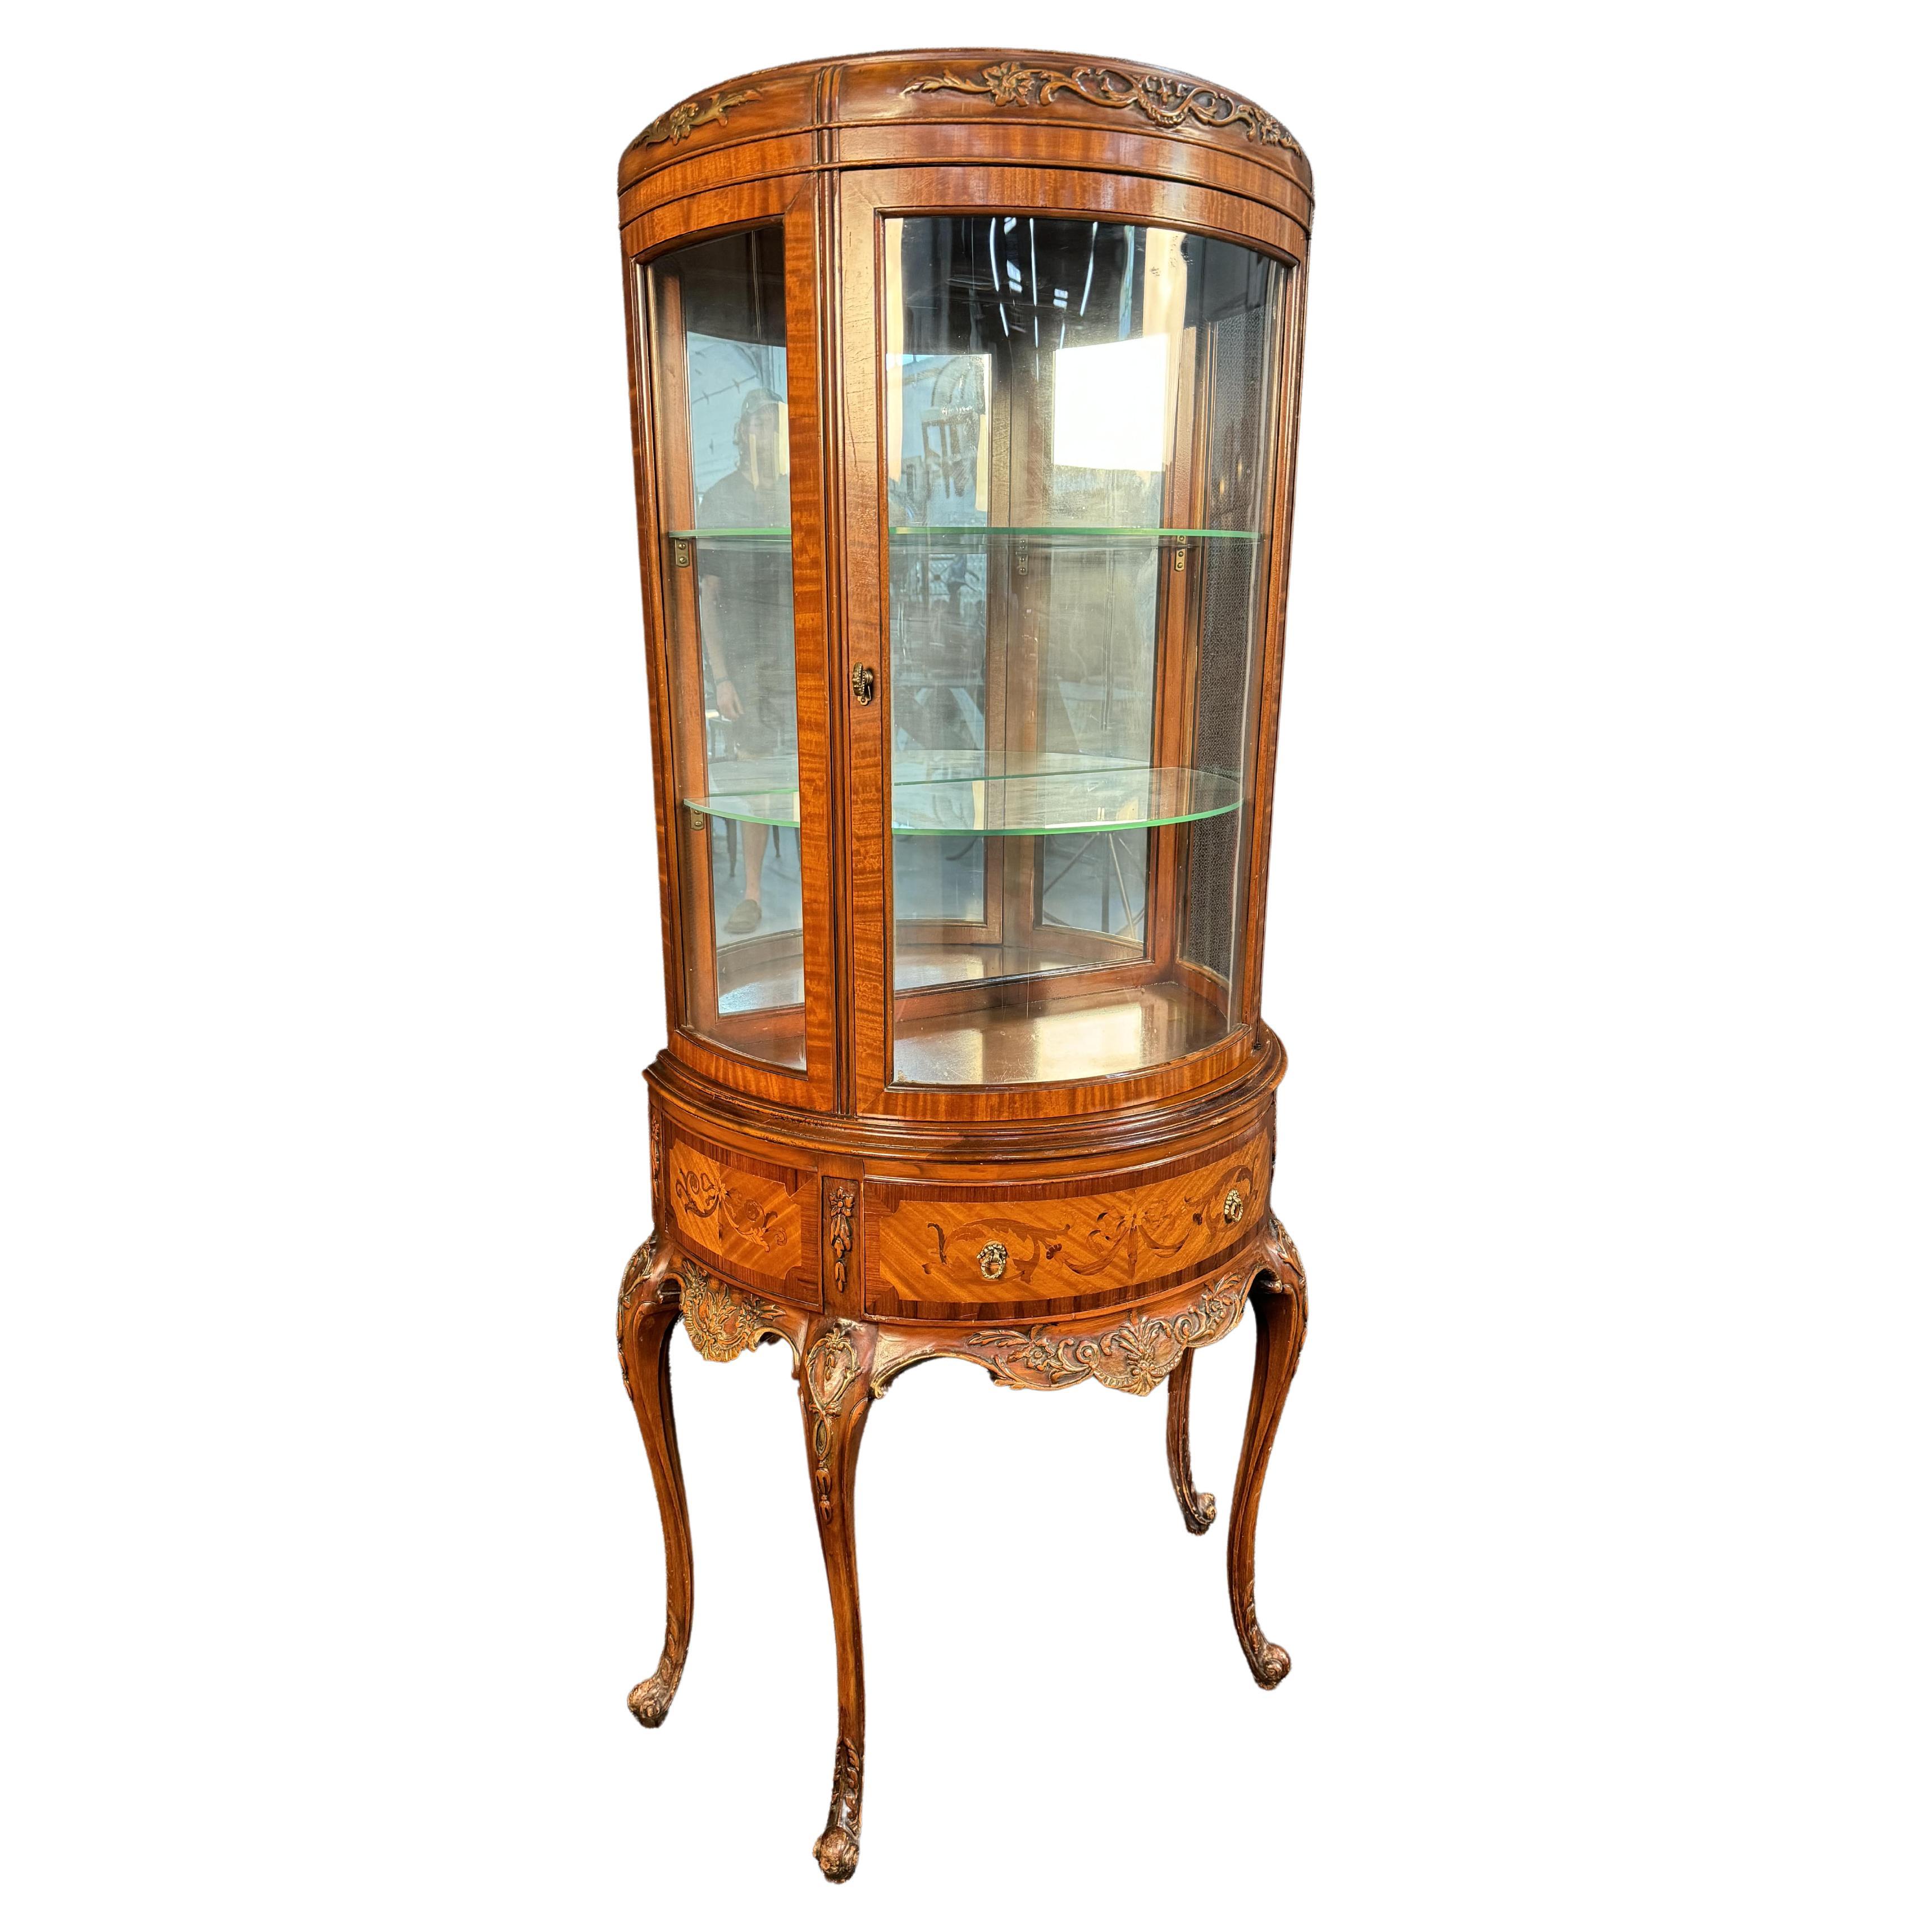 An elegant curved glass china or curio display cabinet or vitrine has satinwood, mahogany and rosewood inlaid marquetry. Please confirm location with seller (NY or NJ)

